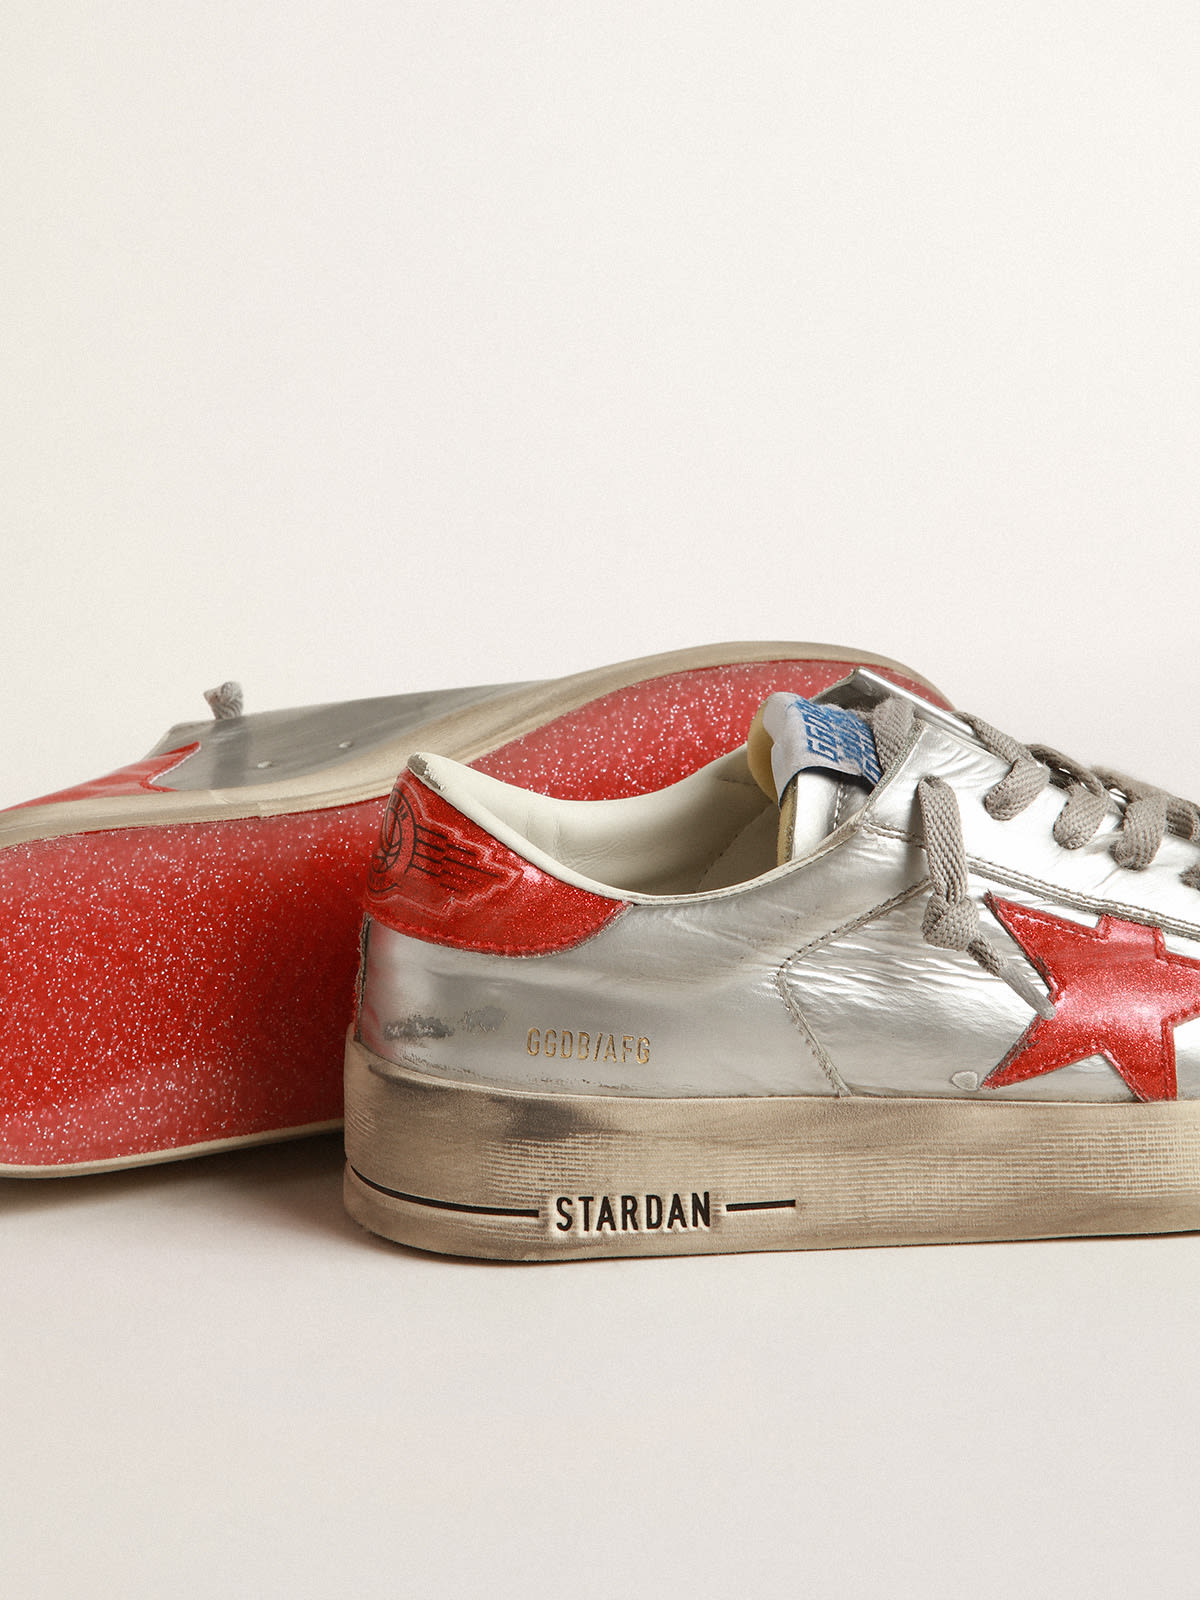 Golden Goose - Men's Stardan in metallic leather with red glitter inserts in 